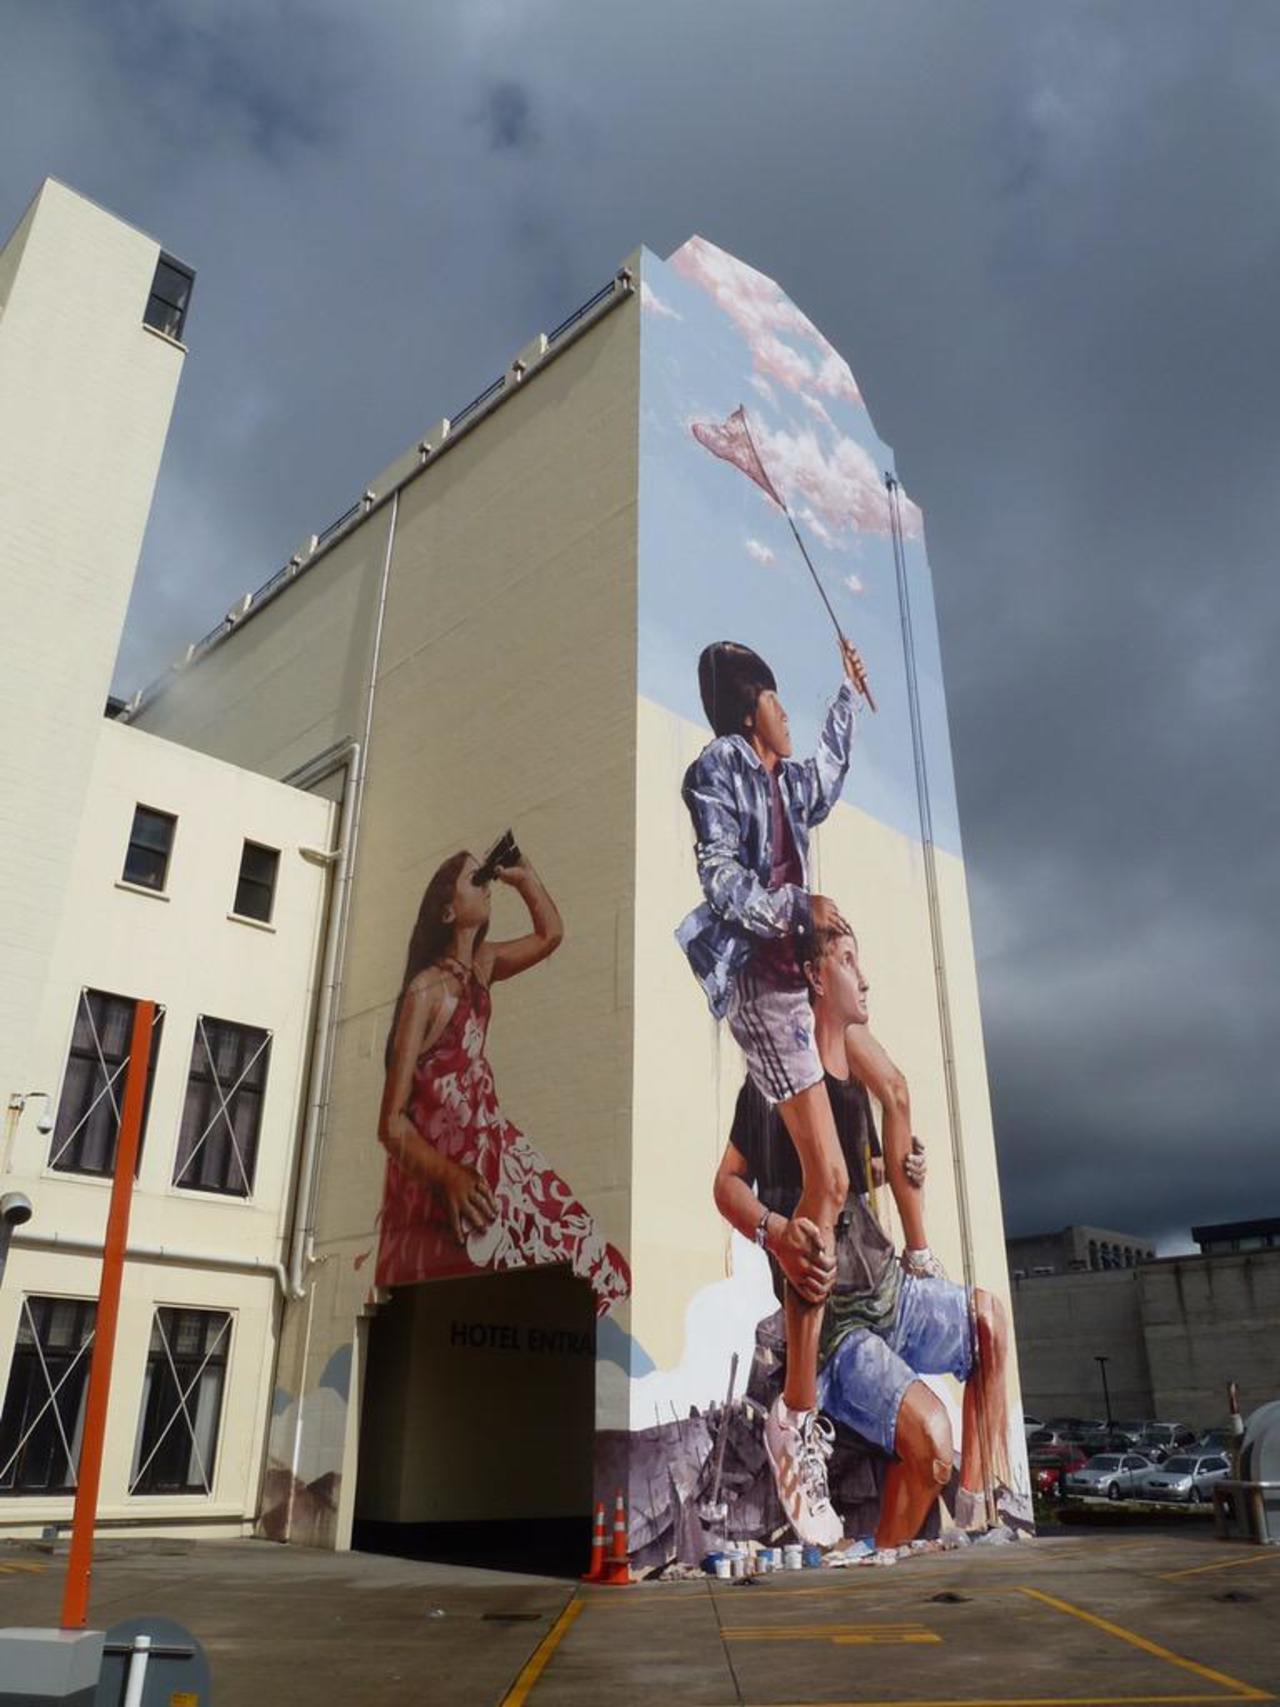 #fintanmagee finished wall in Dunedin, New Zealand #streetartdunedin #streetartnz #streetart #mural #graffiti http://t.co/ovUBntEtsU